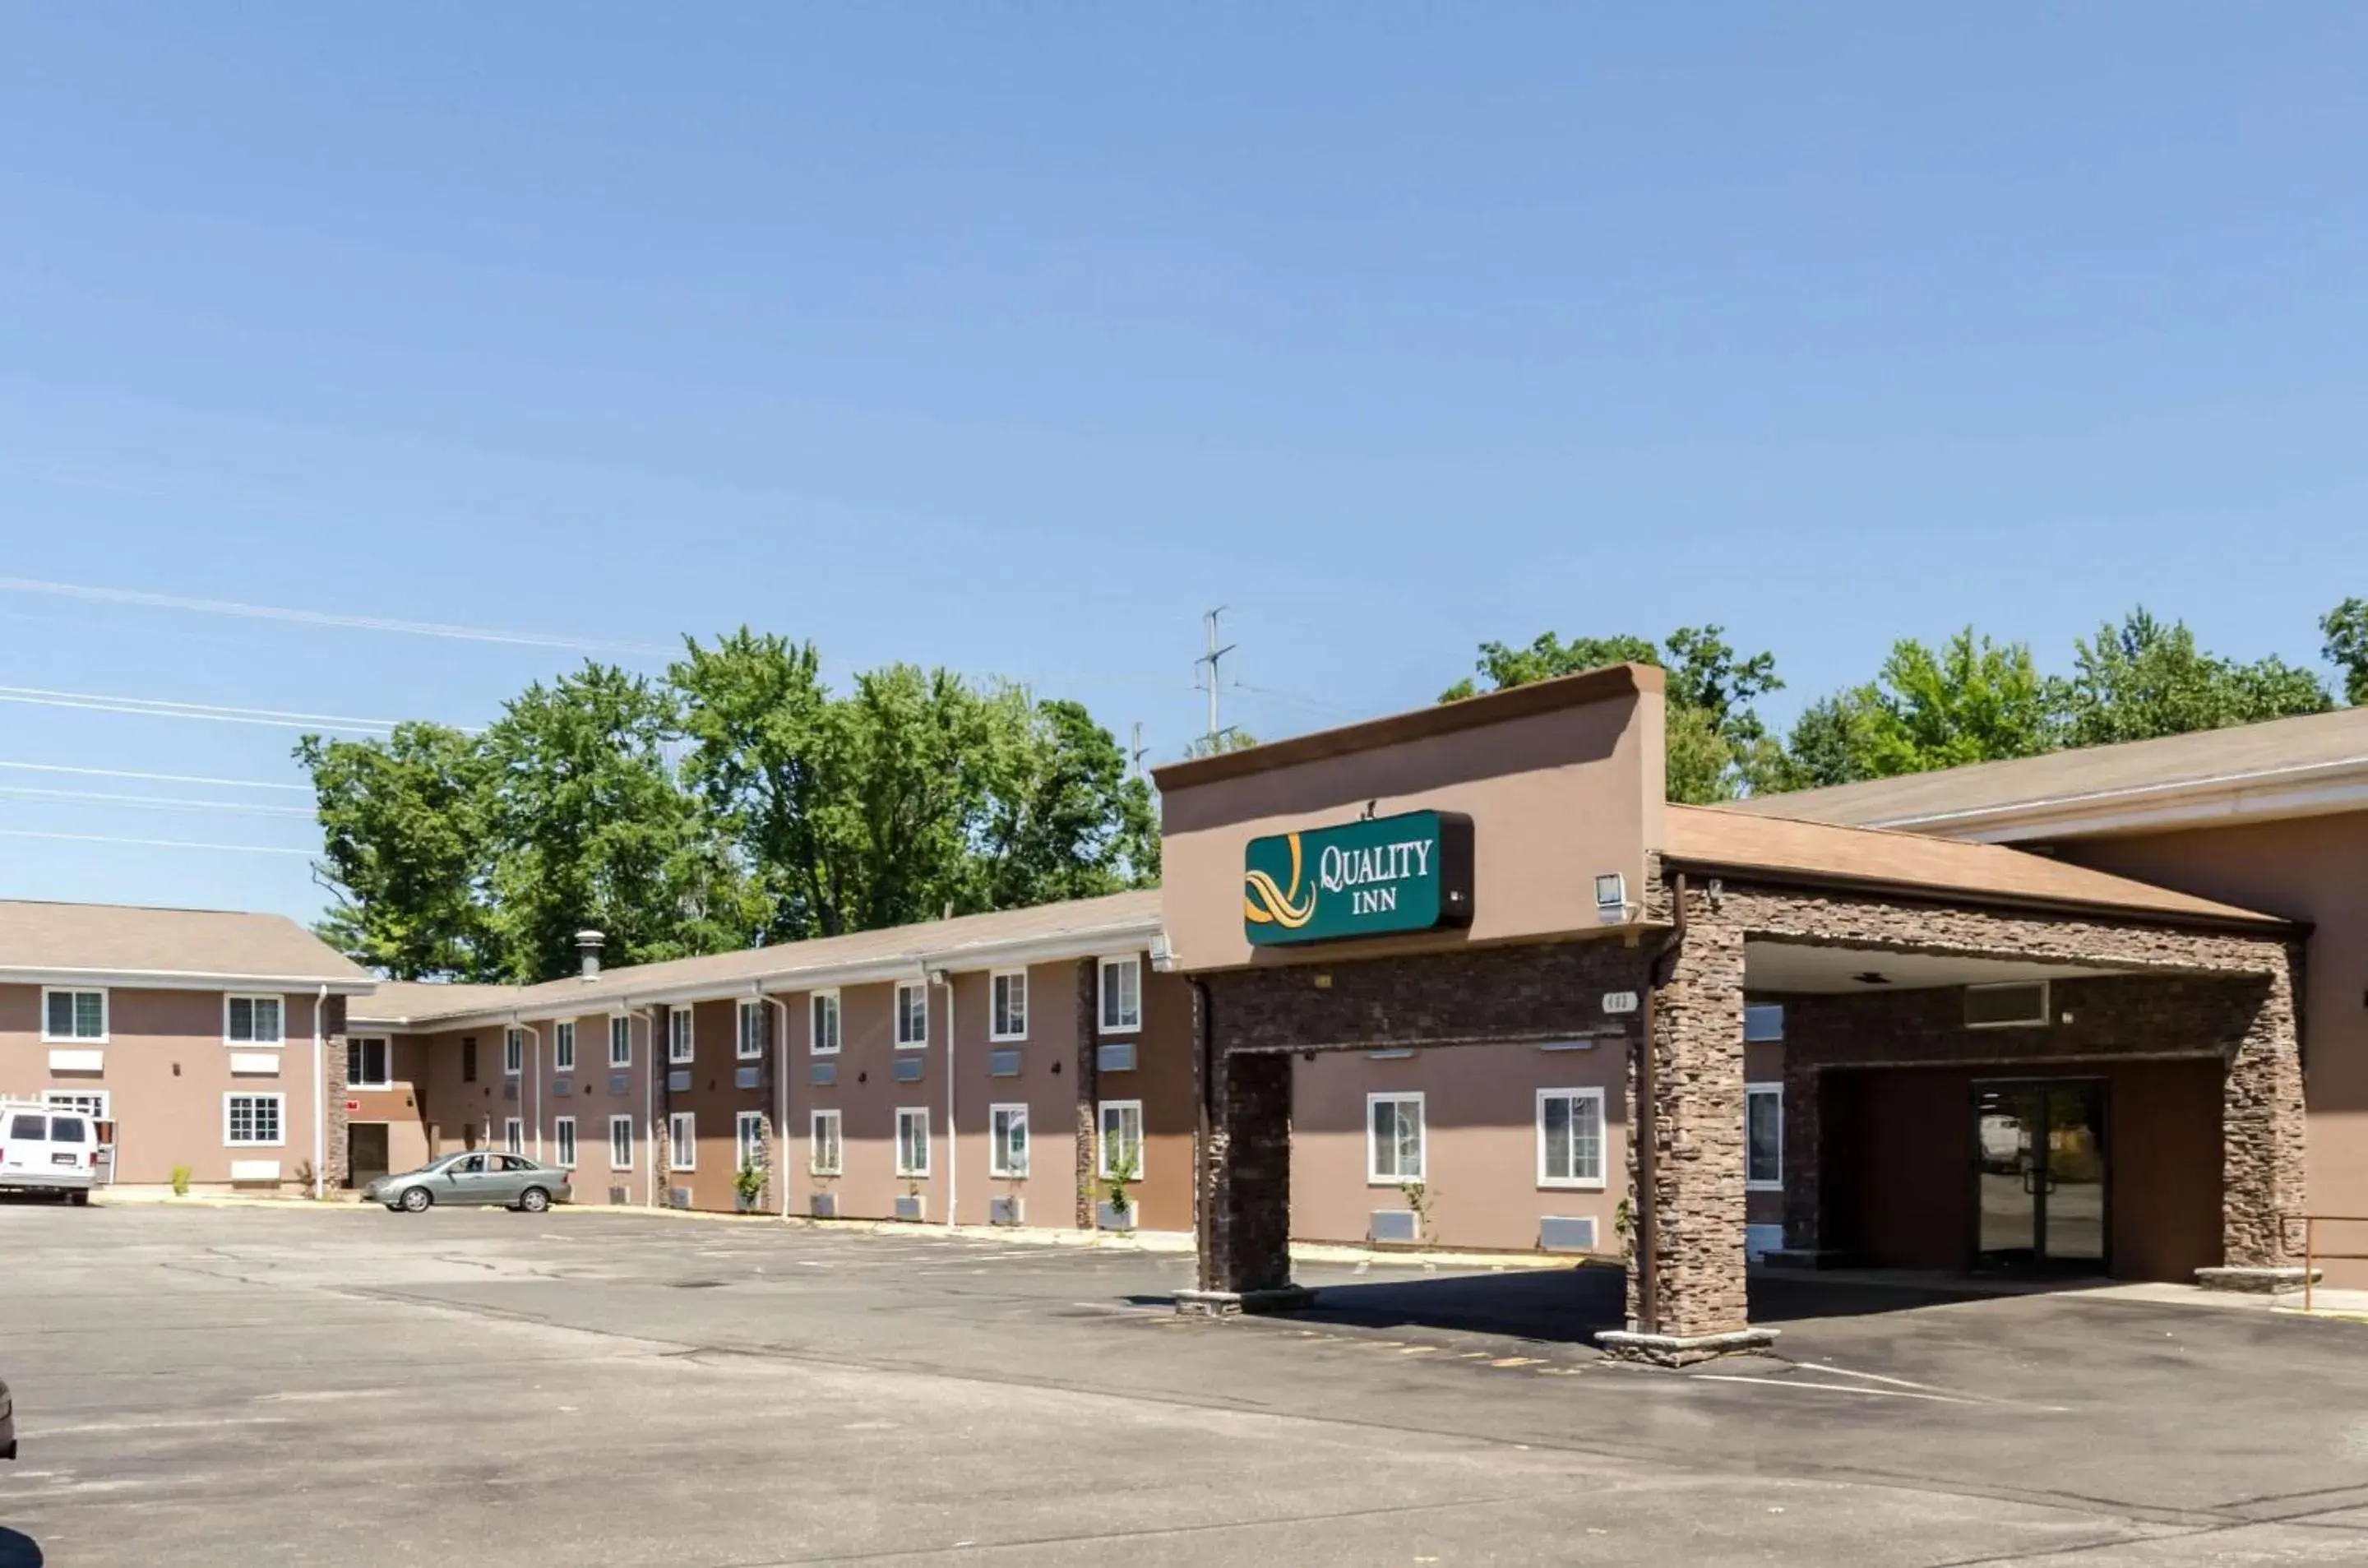 Property building in Quality Inn Chicopee